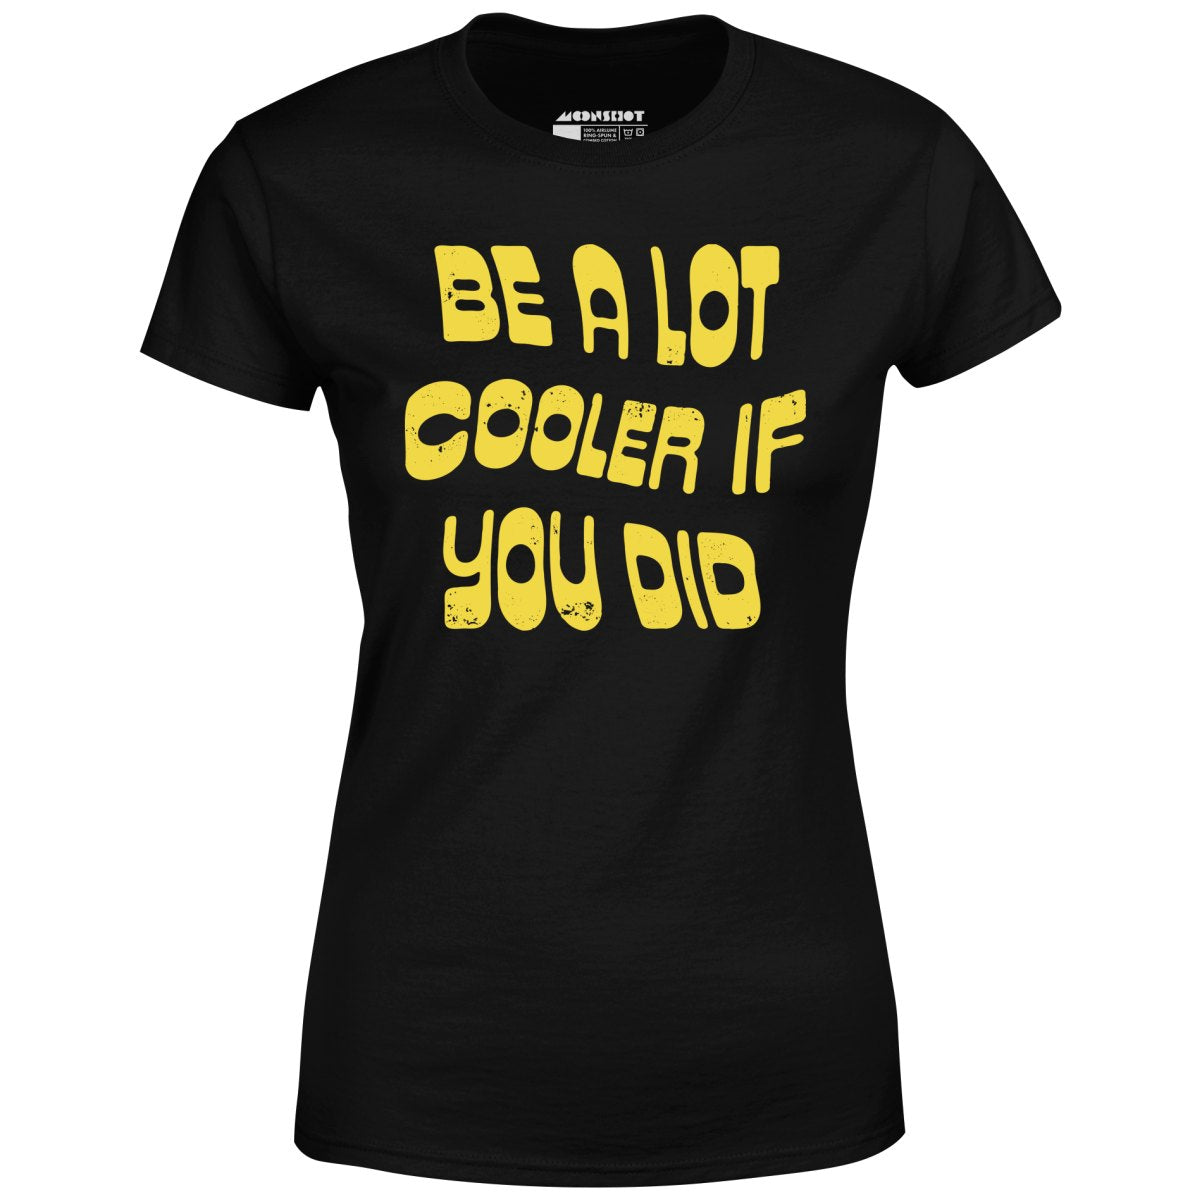 Be a Lot Cooler if You Did - Women's T-Shirt